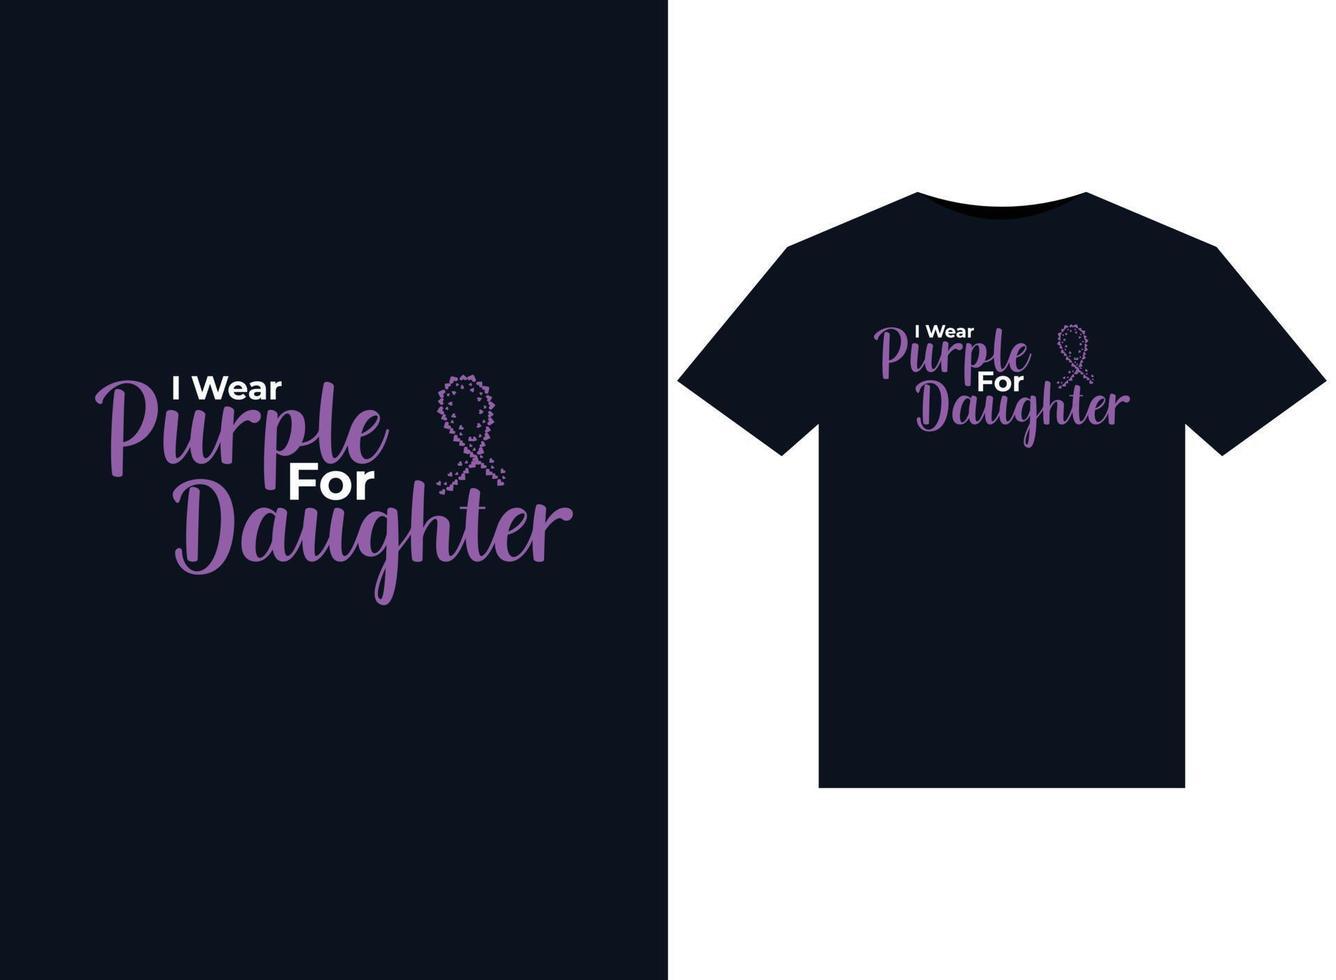 I Wear Purple For Daughter illustrations for print-ready T-Shirts design vector